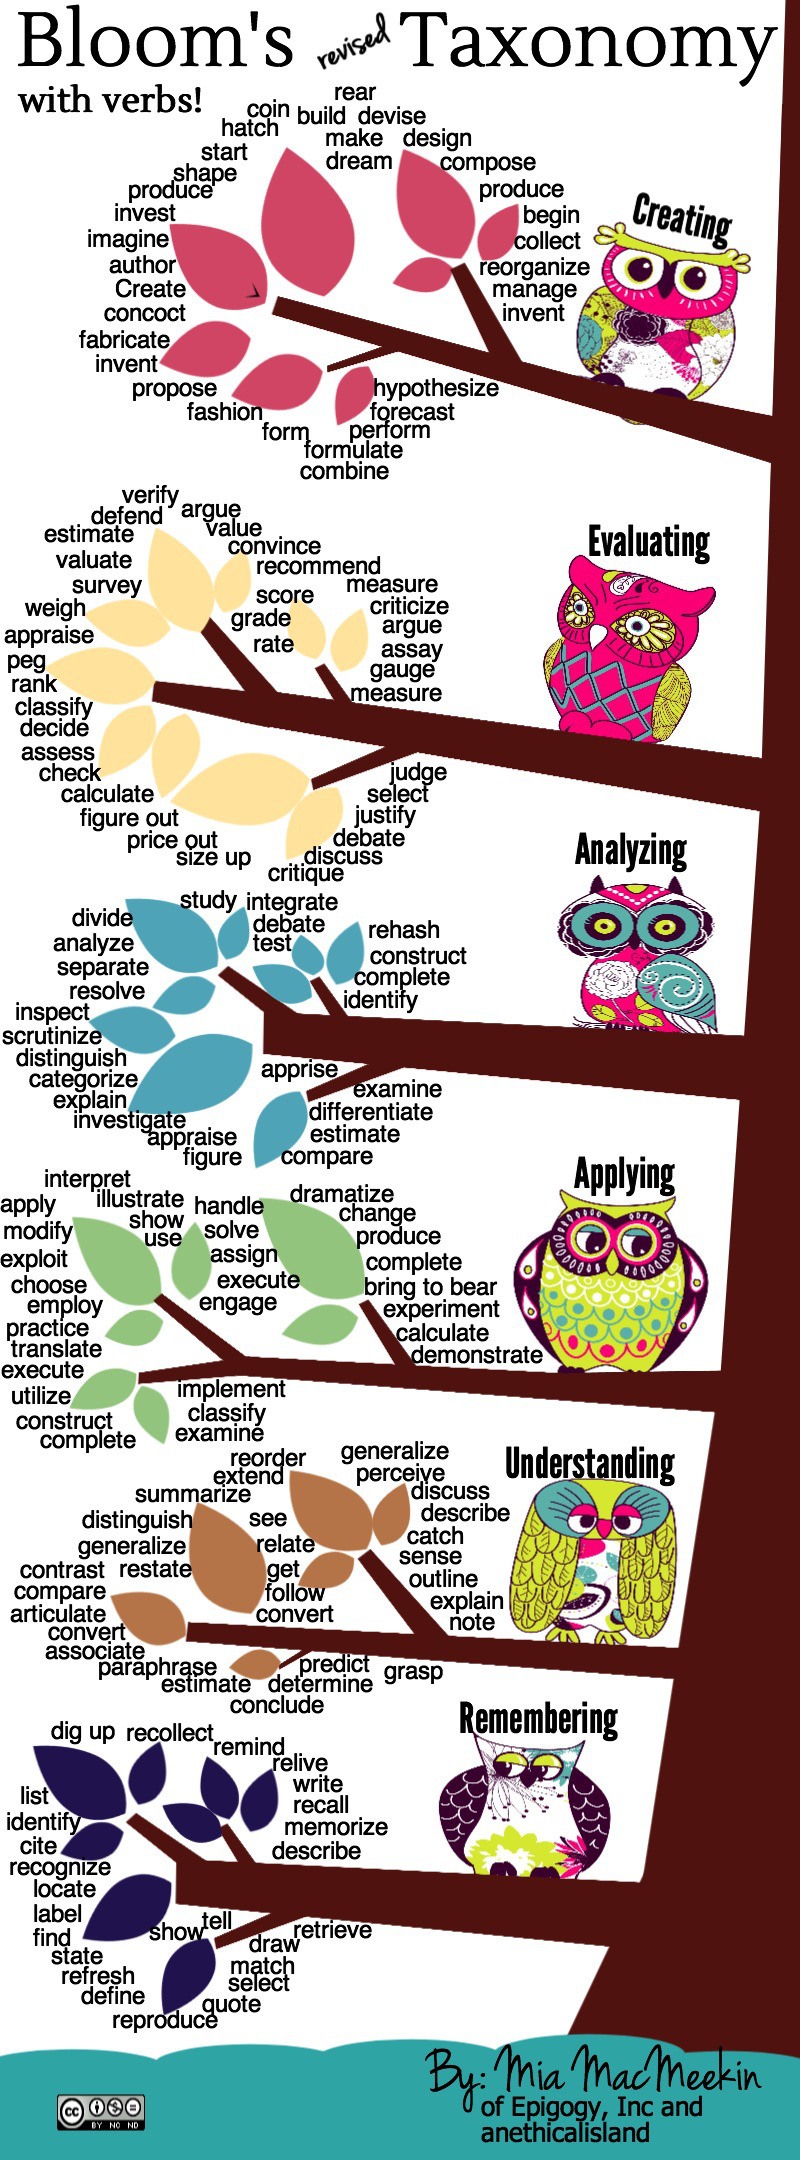 Infographic of Bloom’s Revised Taxonomy Action Verbs